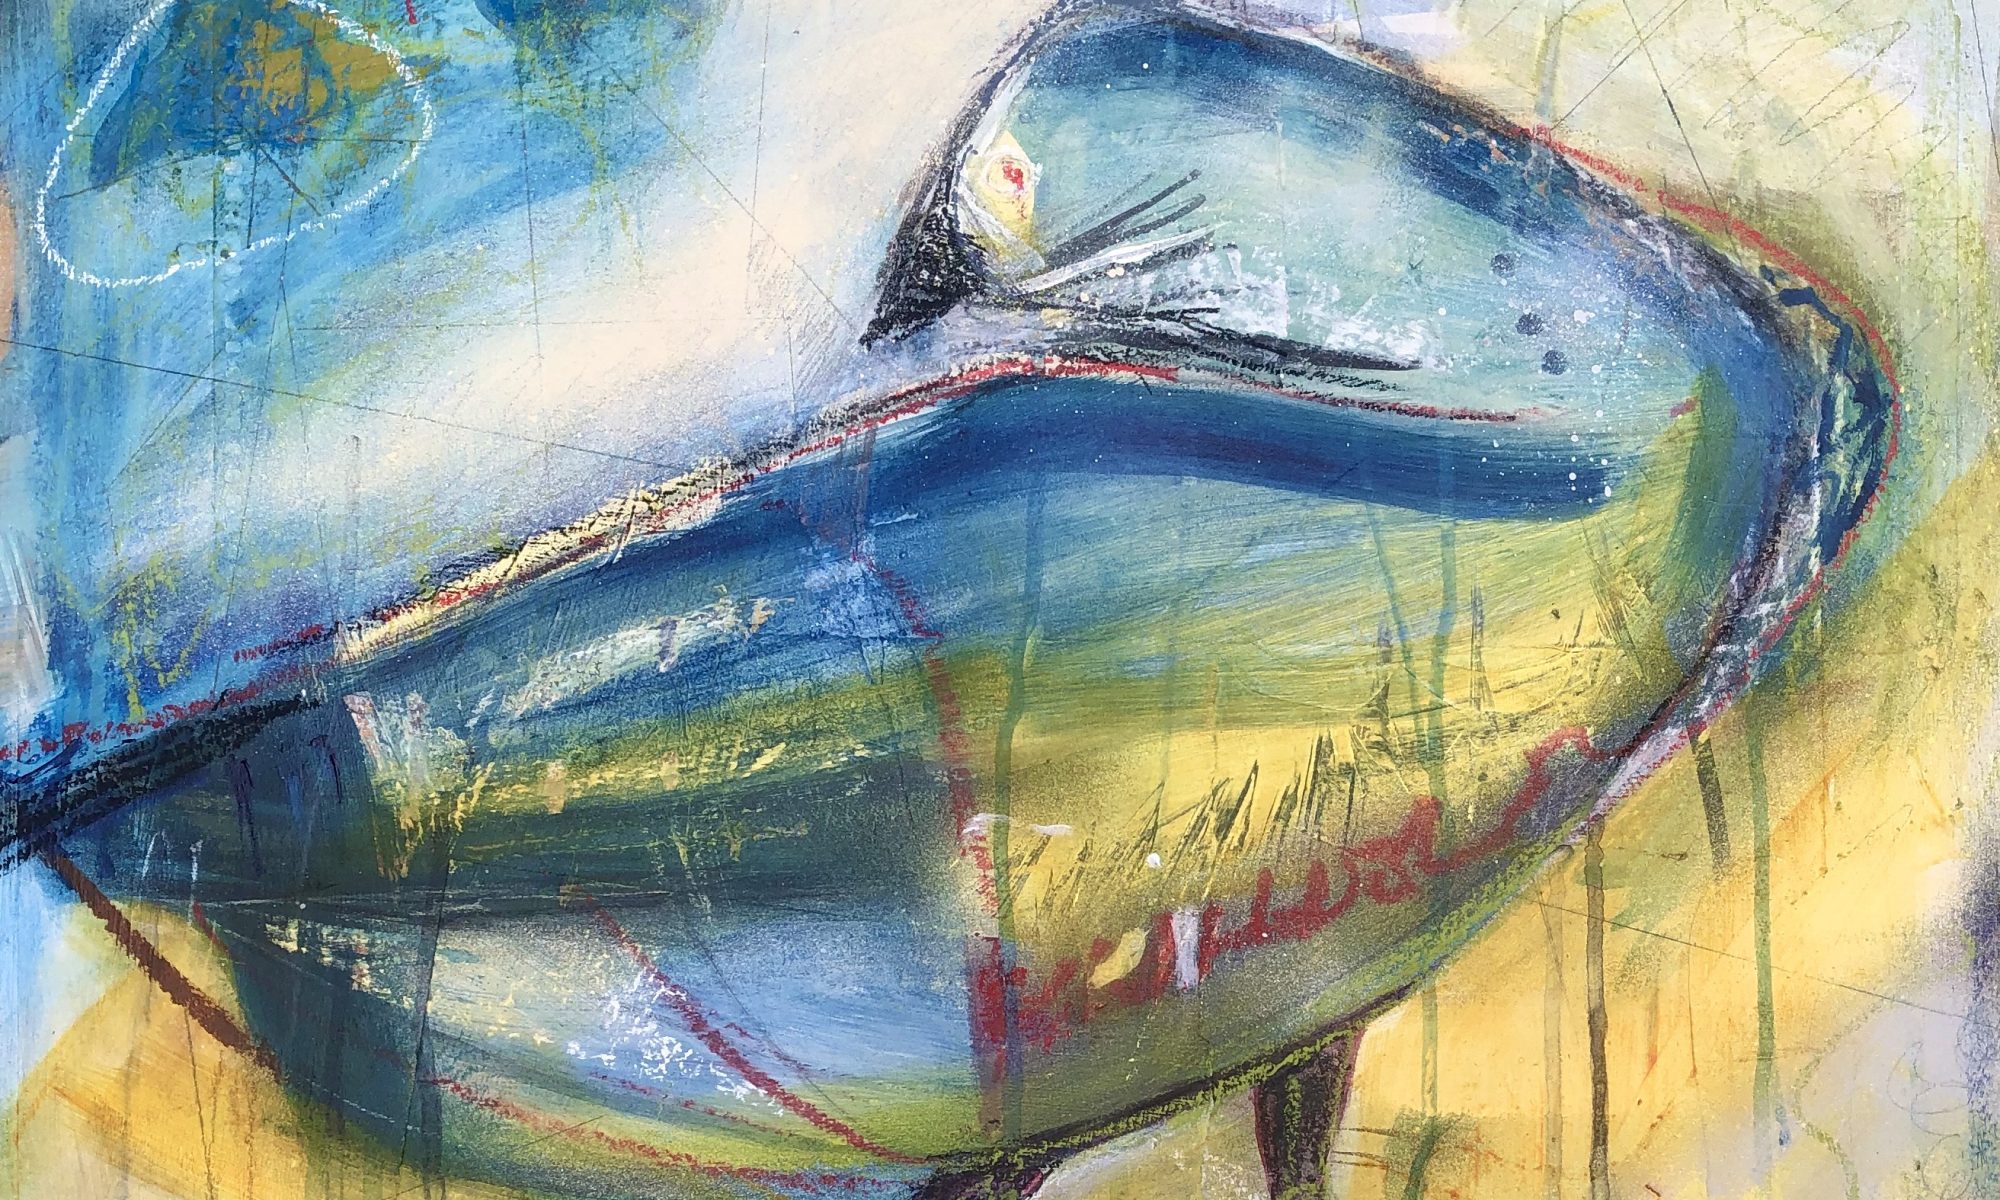 Painting The Goose who liked to Dance - mixed media on board - 50 x 50 cm - £450 Chrissie Richards